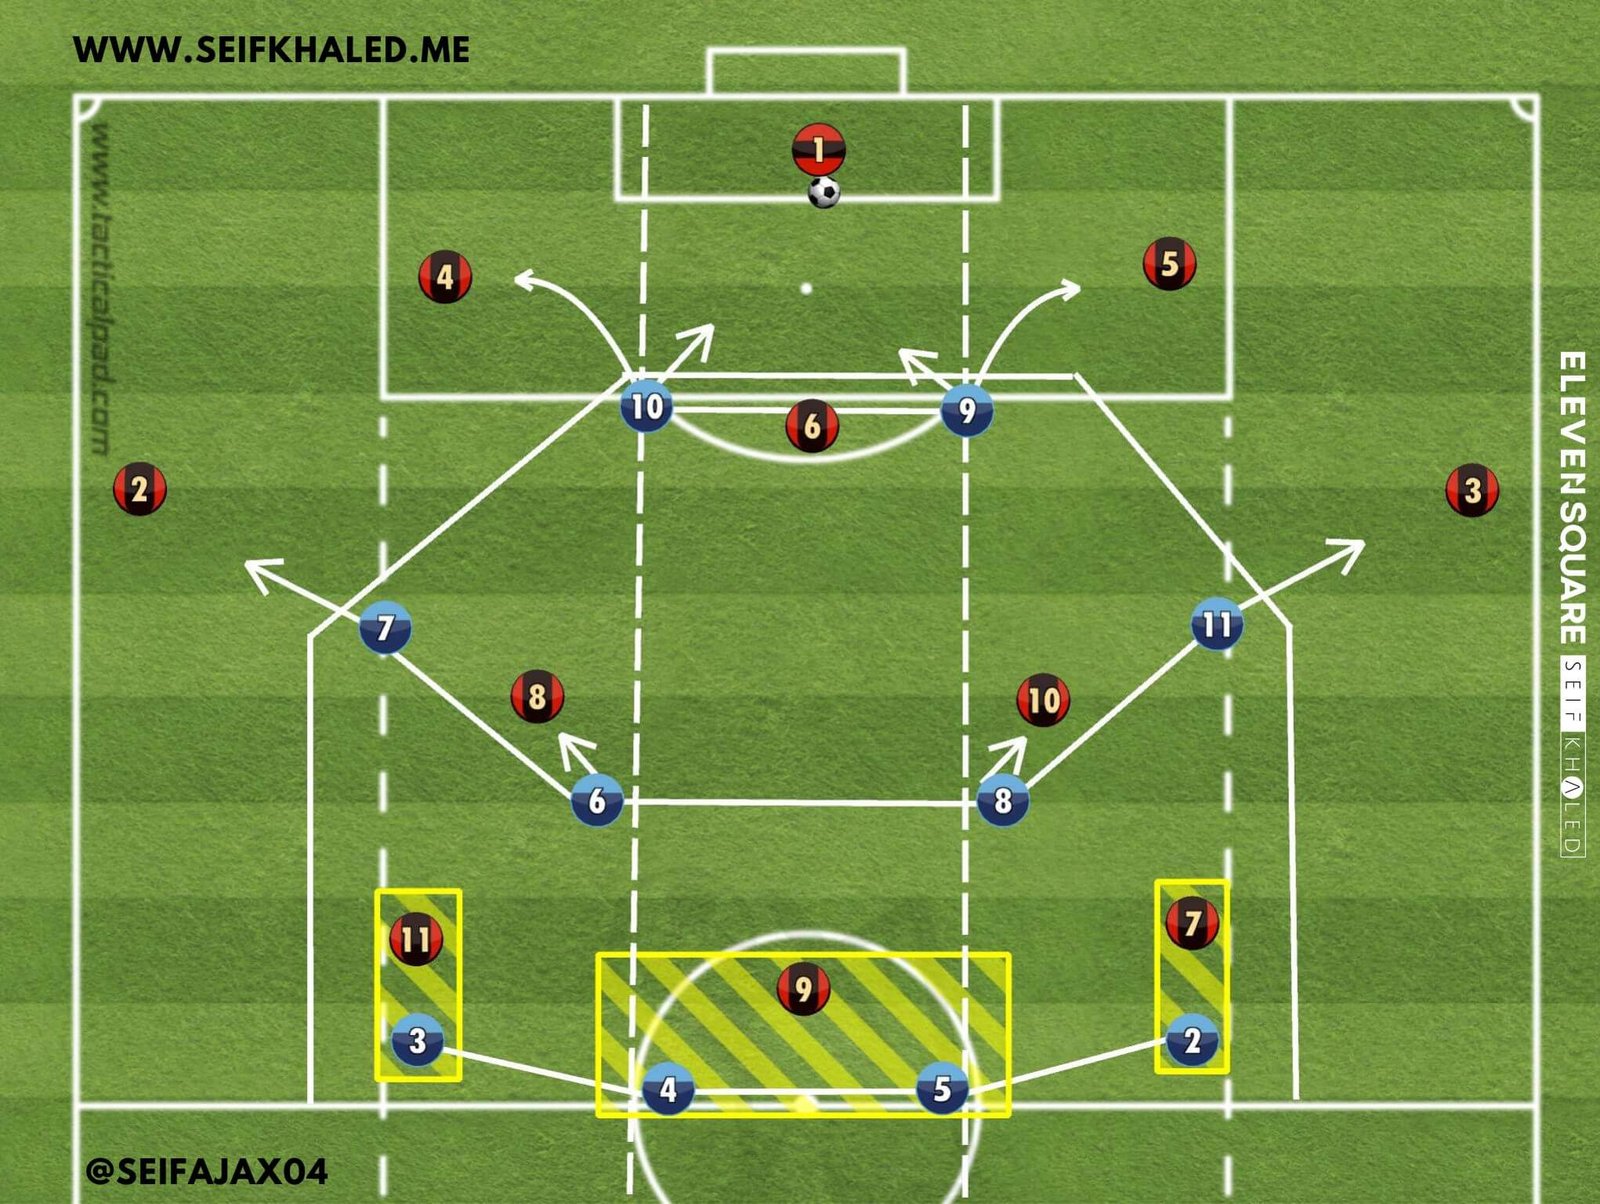 MAN ORIENTED HIGH-PRESS IN A 4-2-2-2 FORMATION